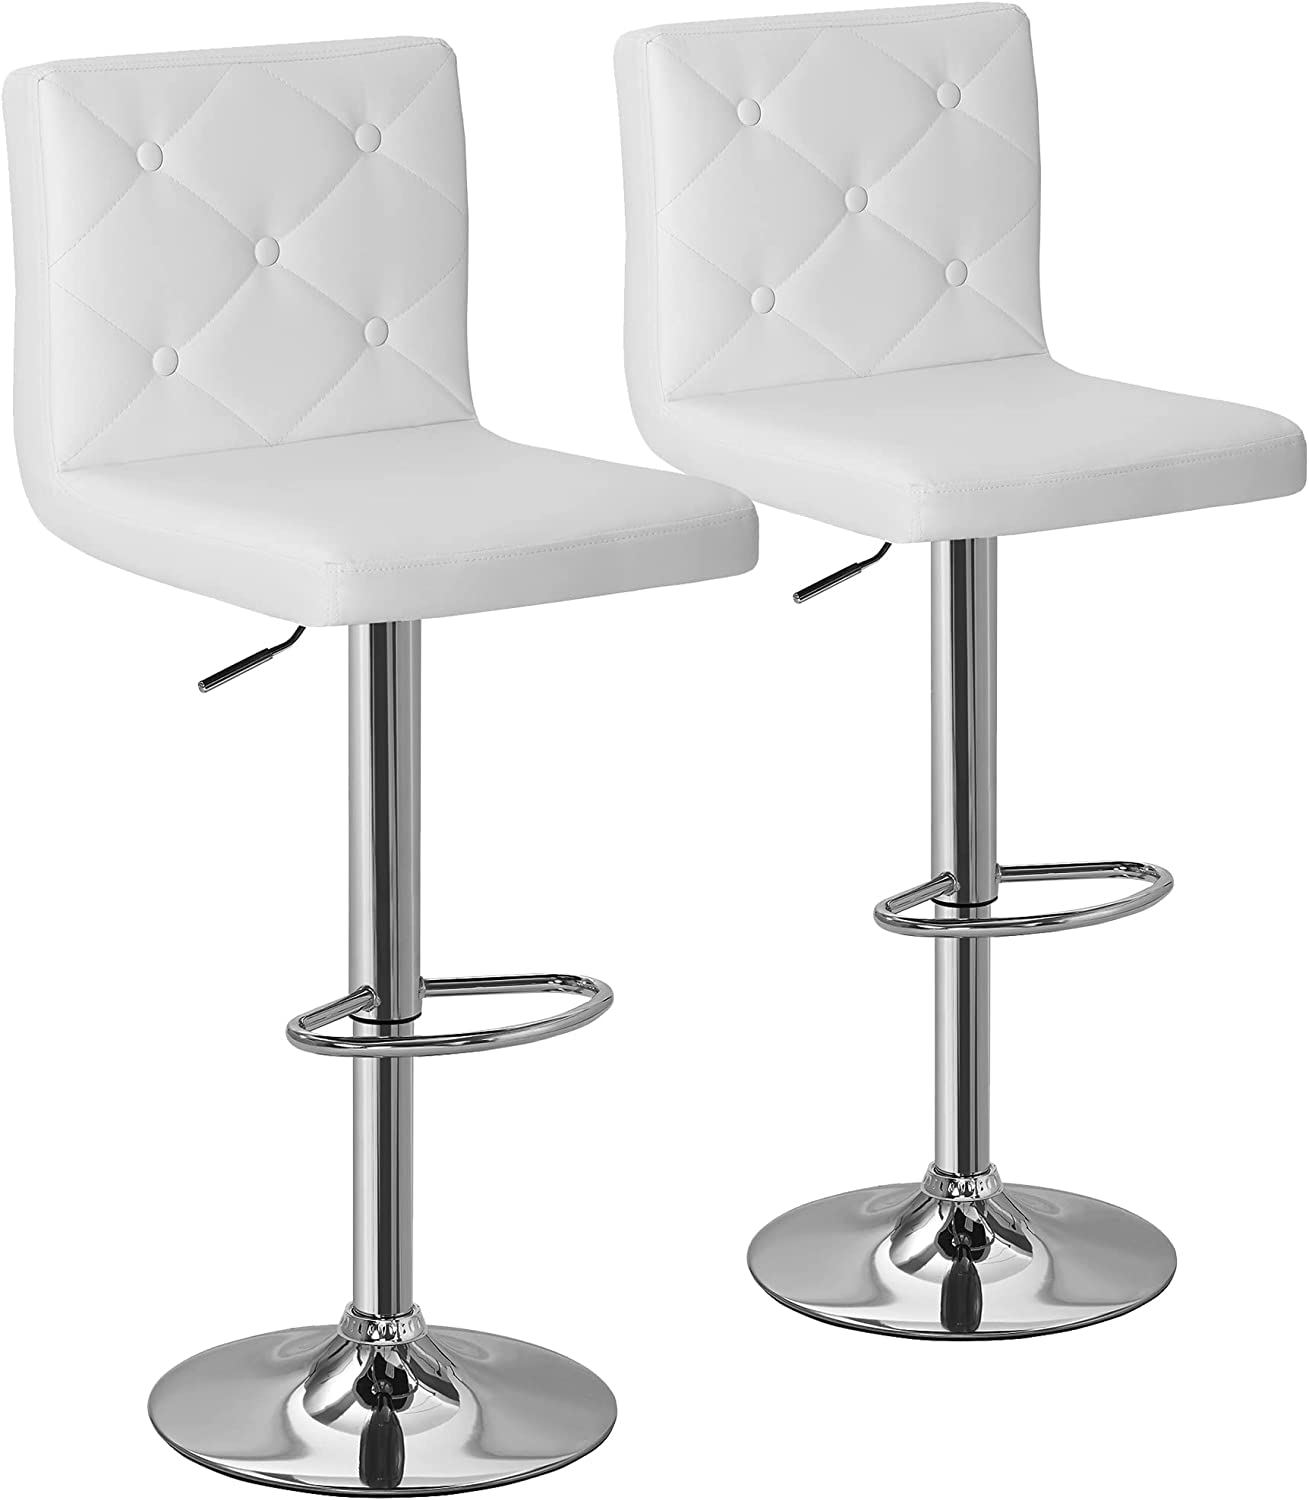 Kitchen Island Counter Height Chairs/Bar Stools Set of 2